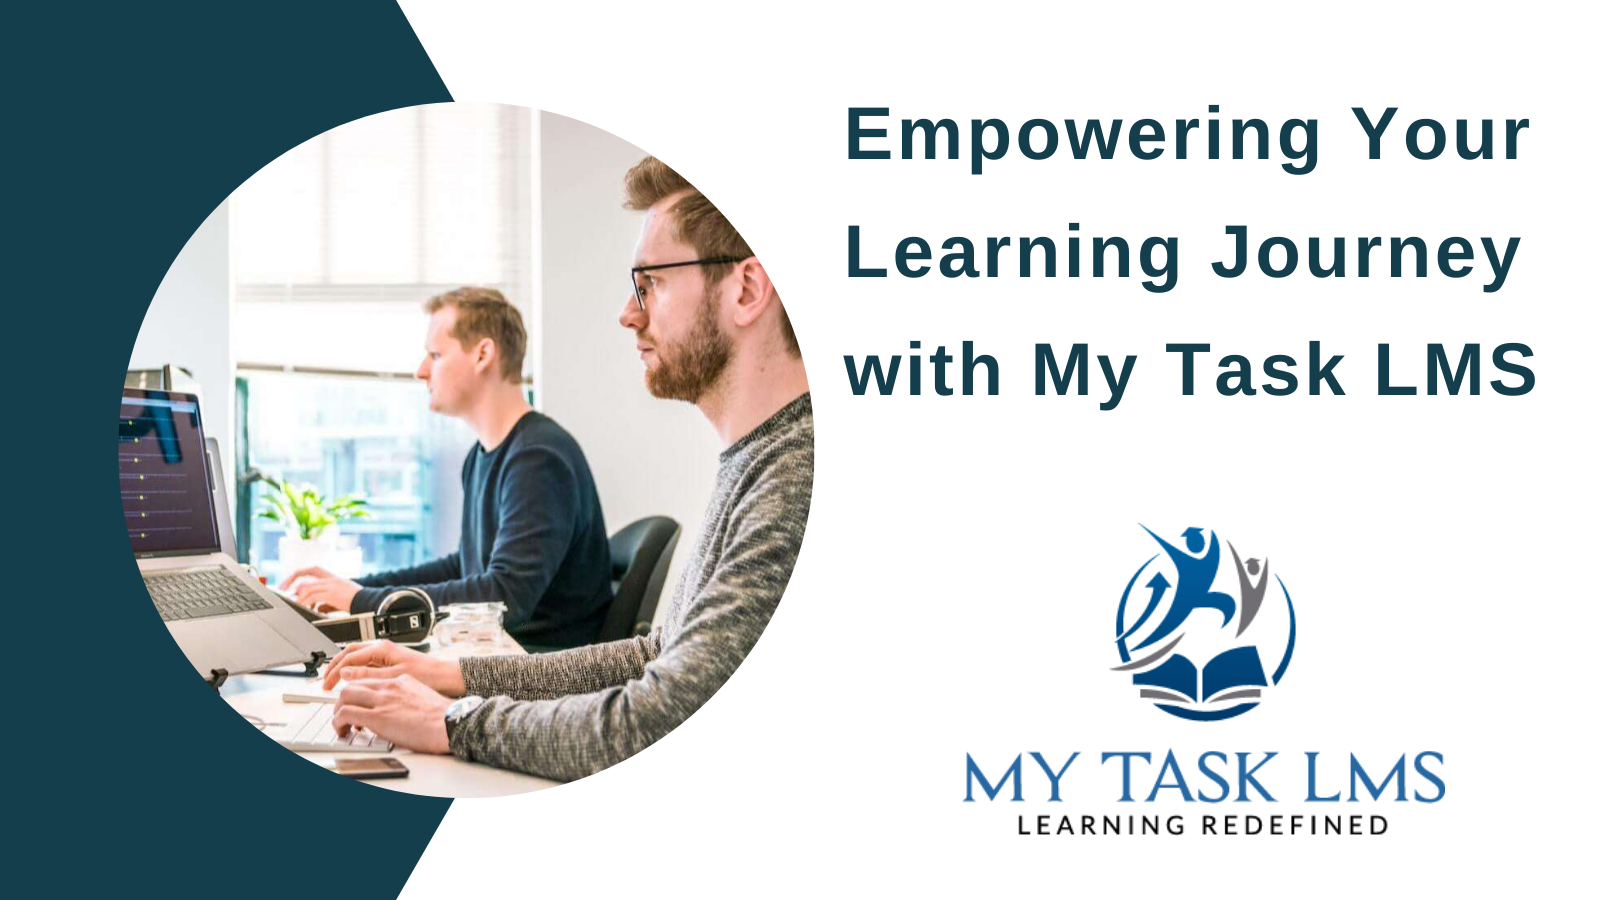 Empowering Your Learning Journey with My Task LMS